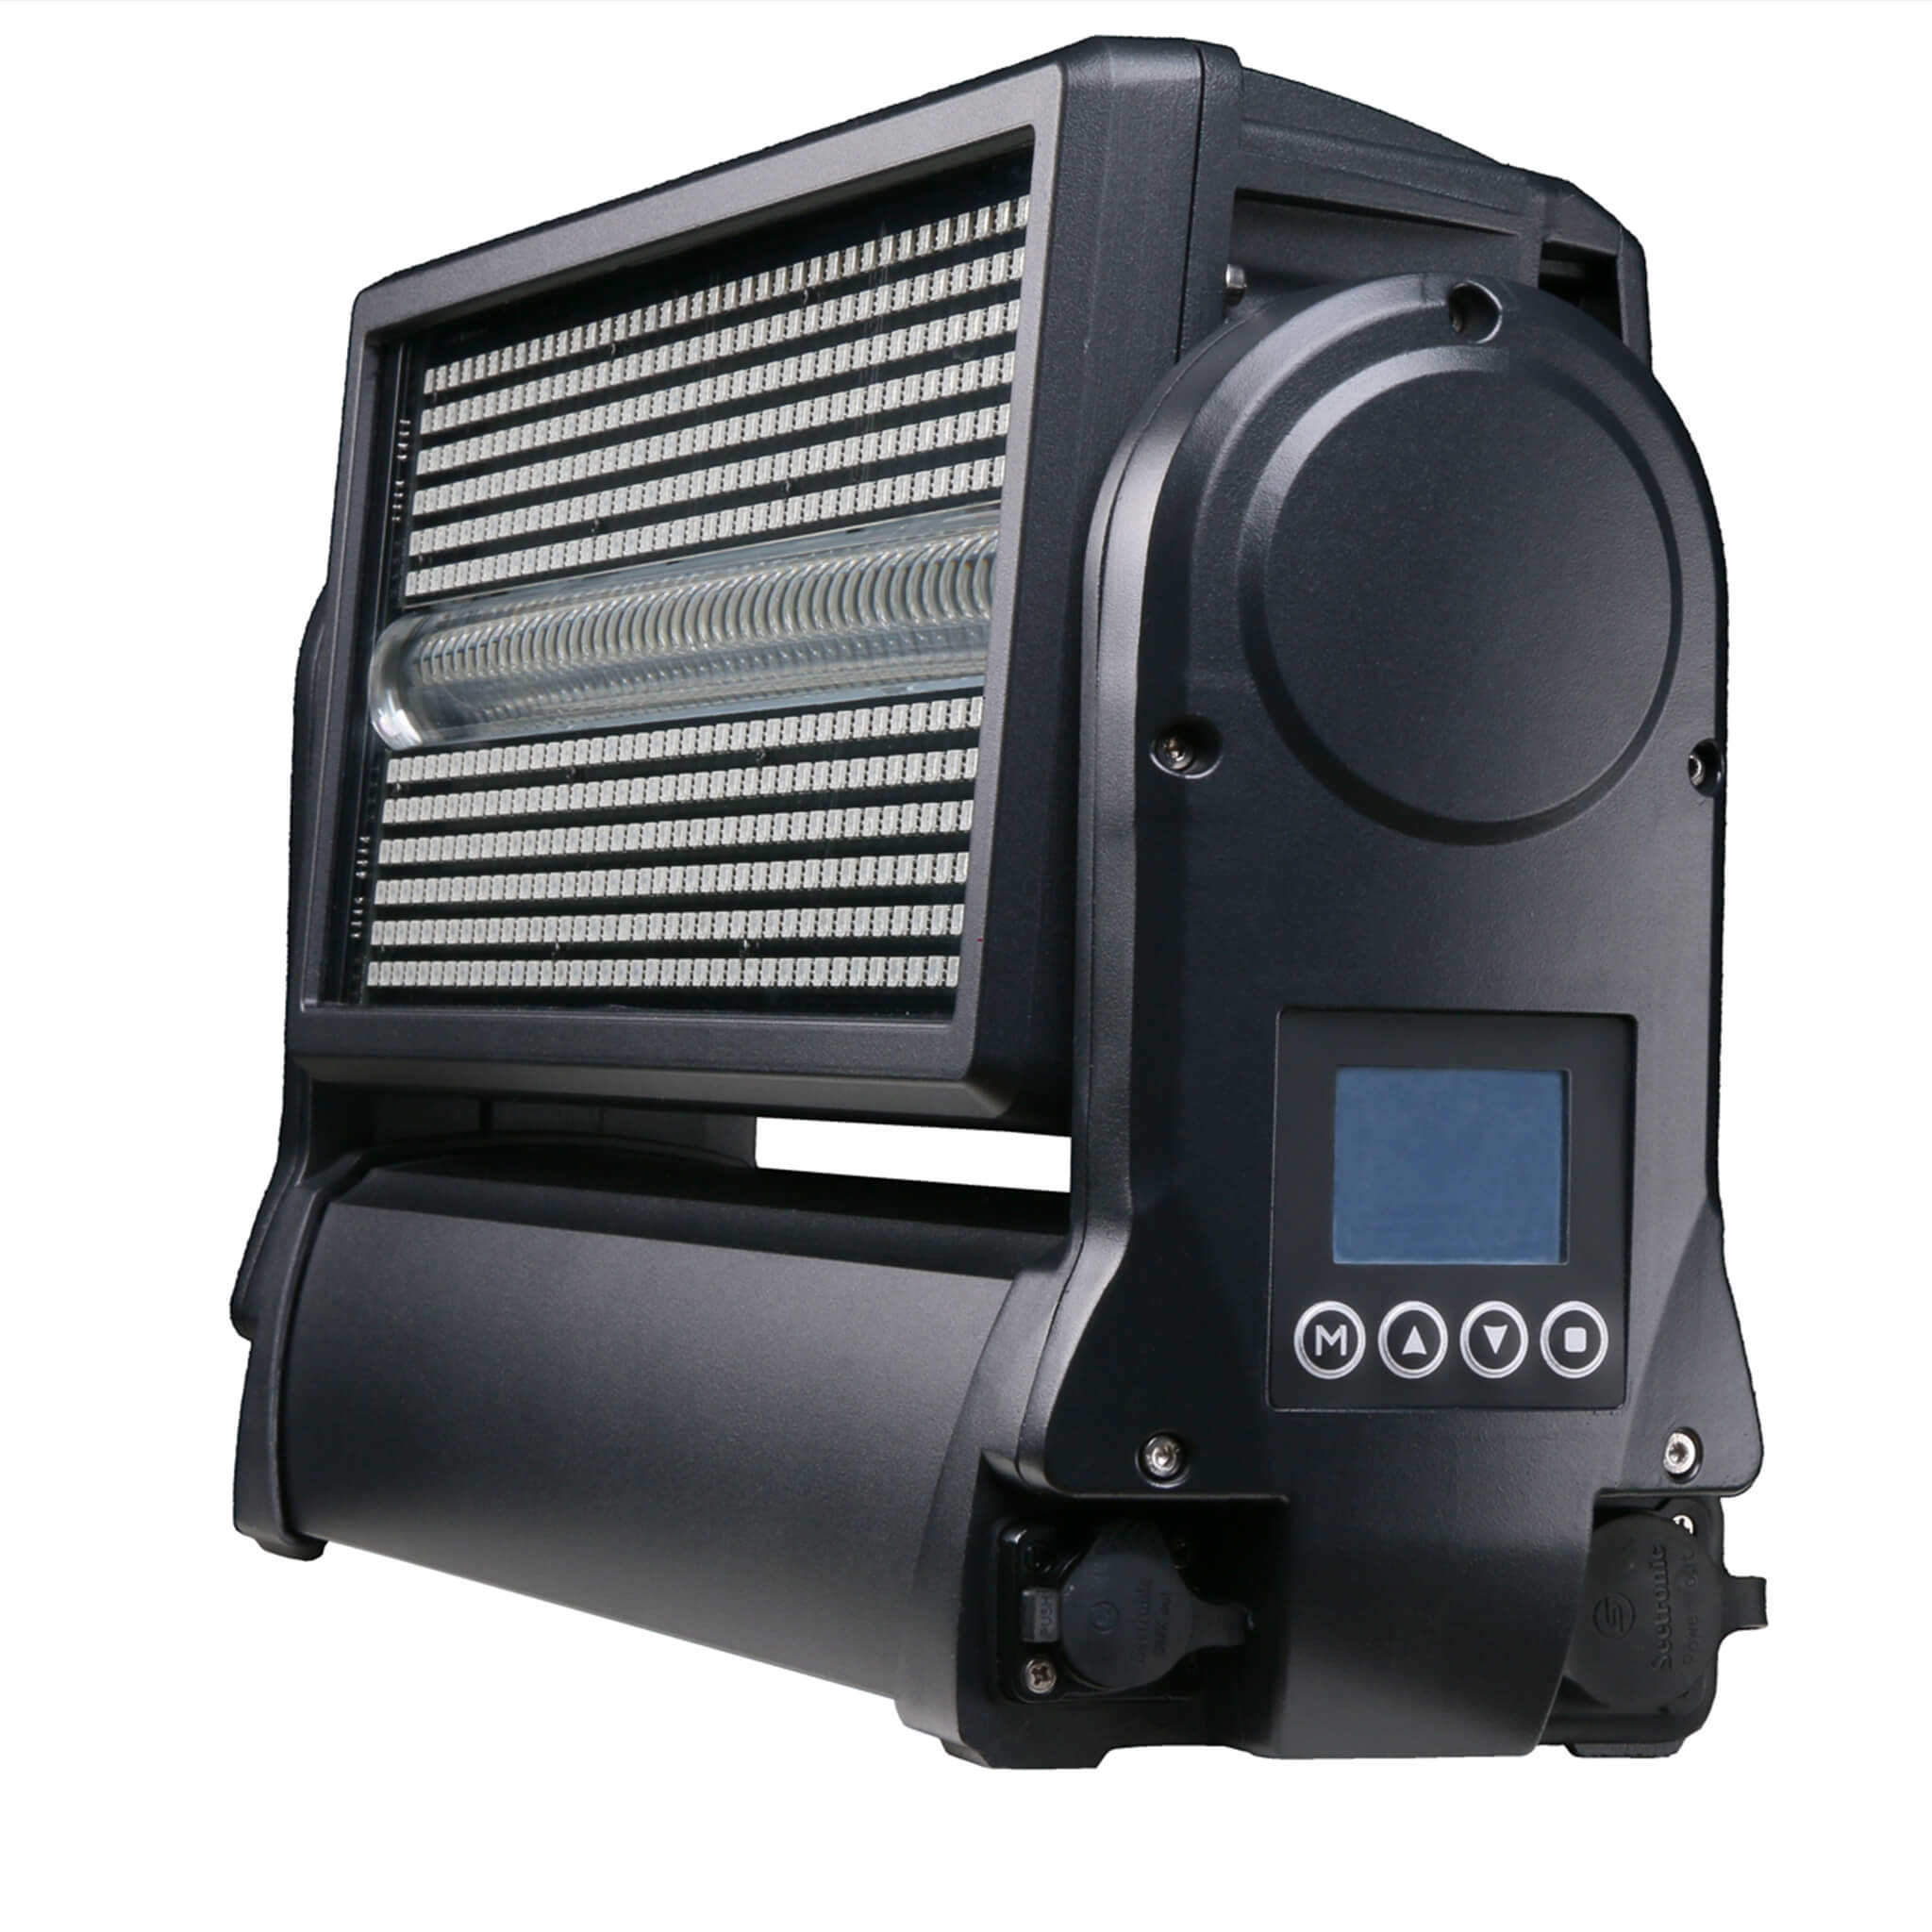 SIP-1000W LED Strobe Wash Outdoor Moving Light